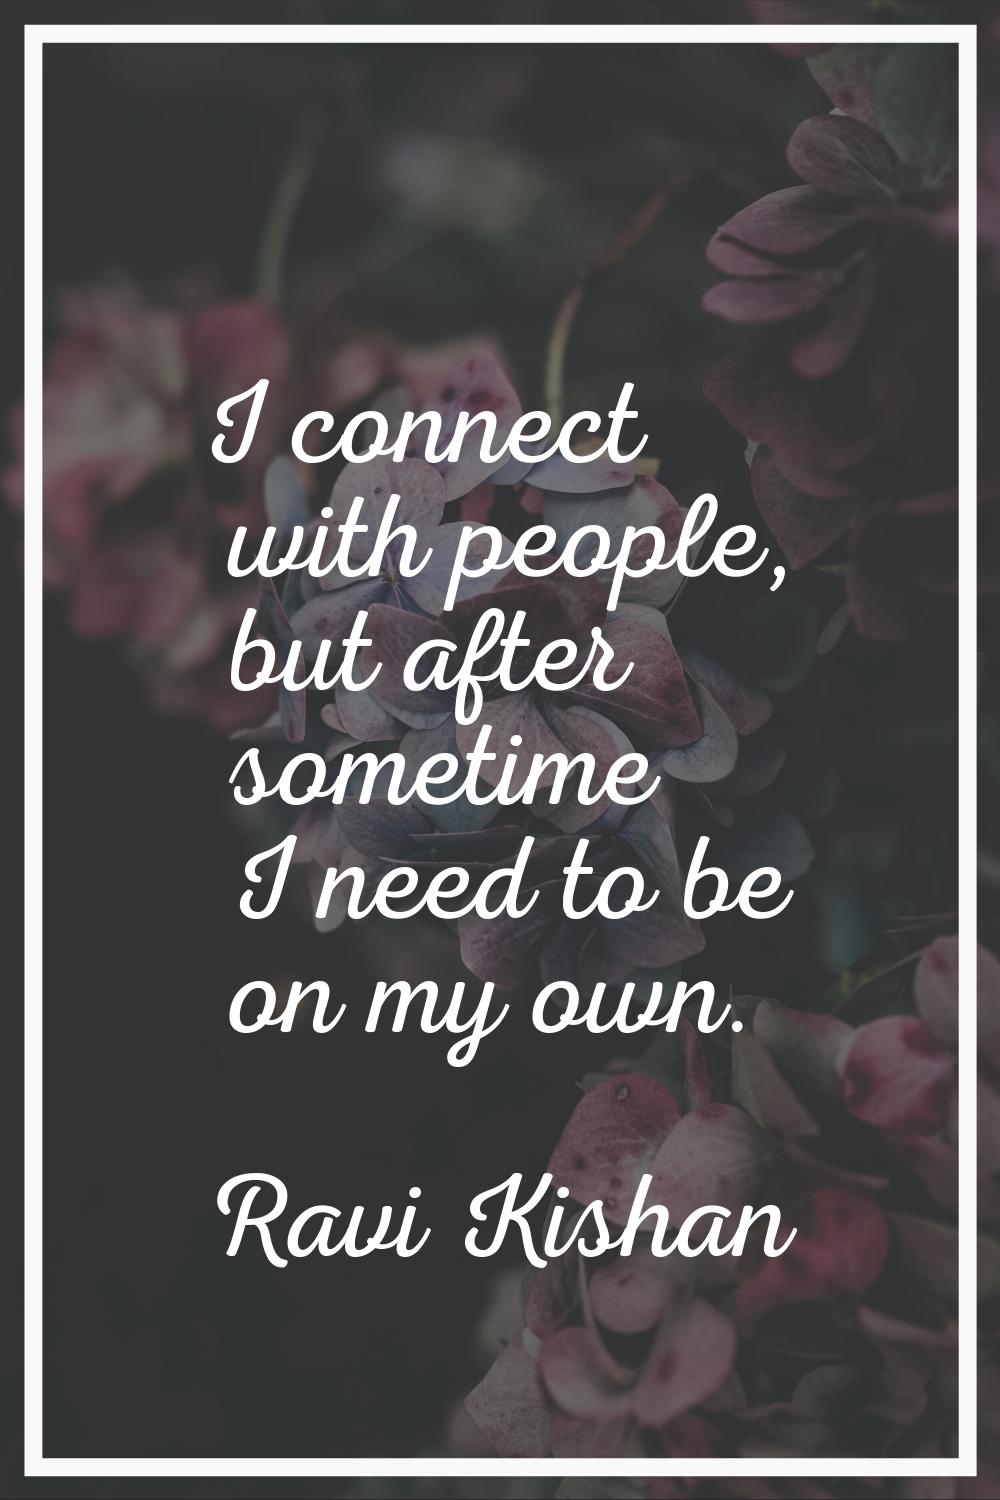 I connect with people, but after sometime I need to be on my own.